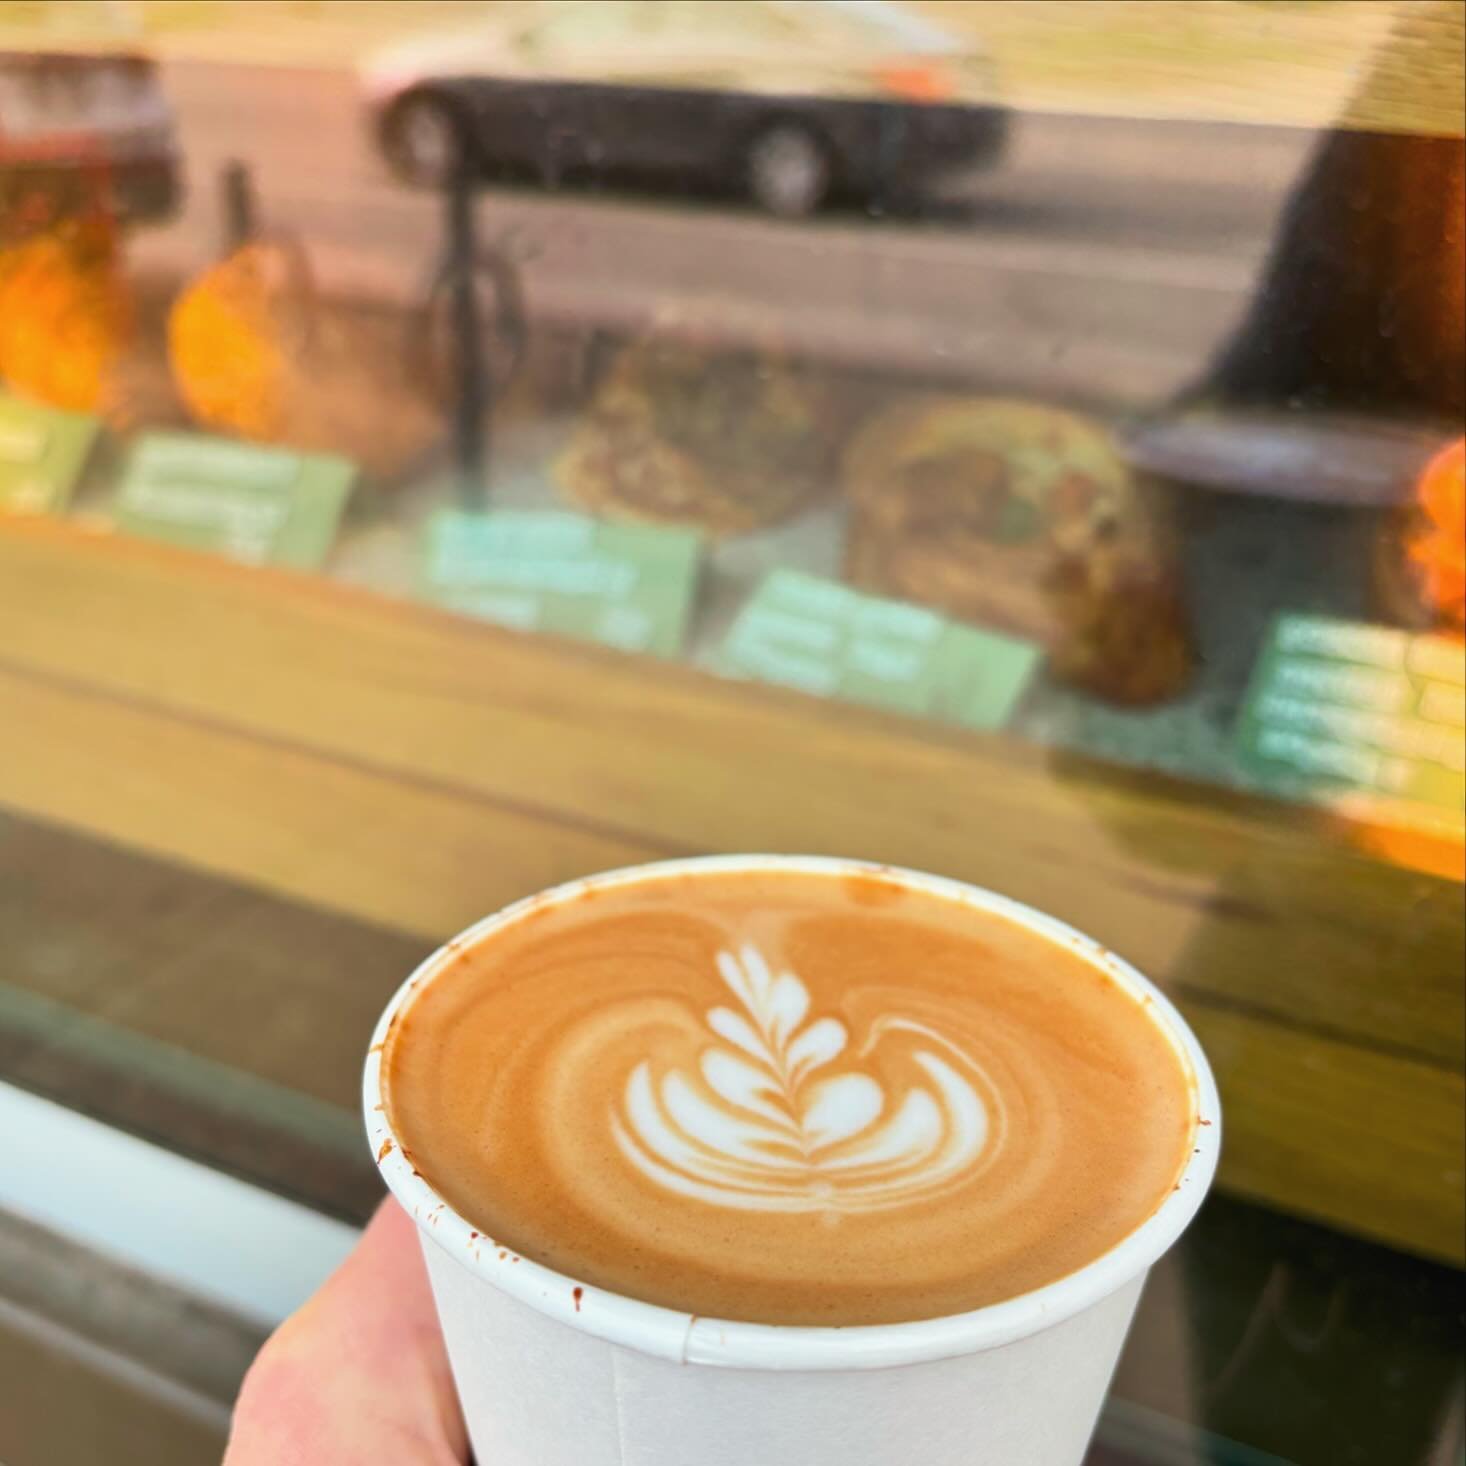 Coffee and pastries are happening now and the sun is shining! Neighboring walk-up windows make a perfect morning stop to bring a little joy to the end of the week. ☕️🥐☀️ #sidewalkcafe #takeout #latte #breakfastofchampions